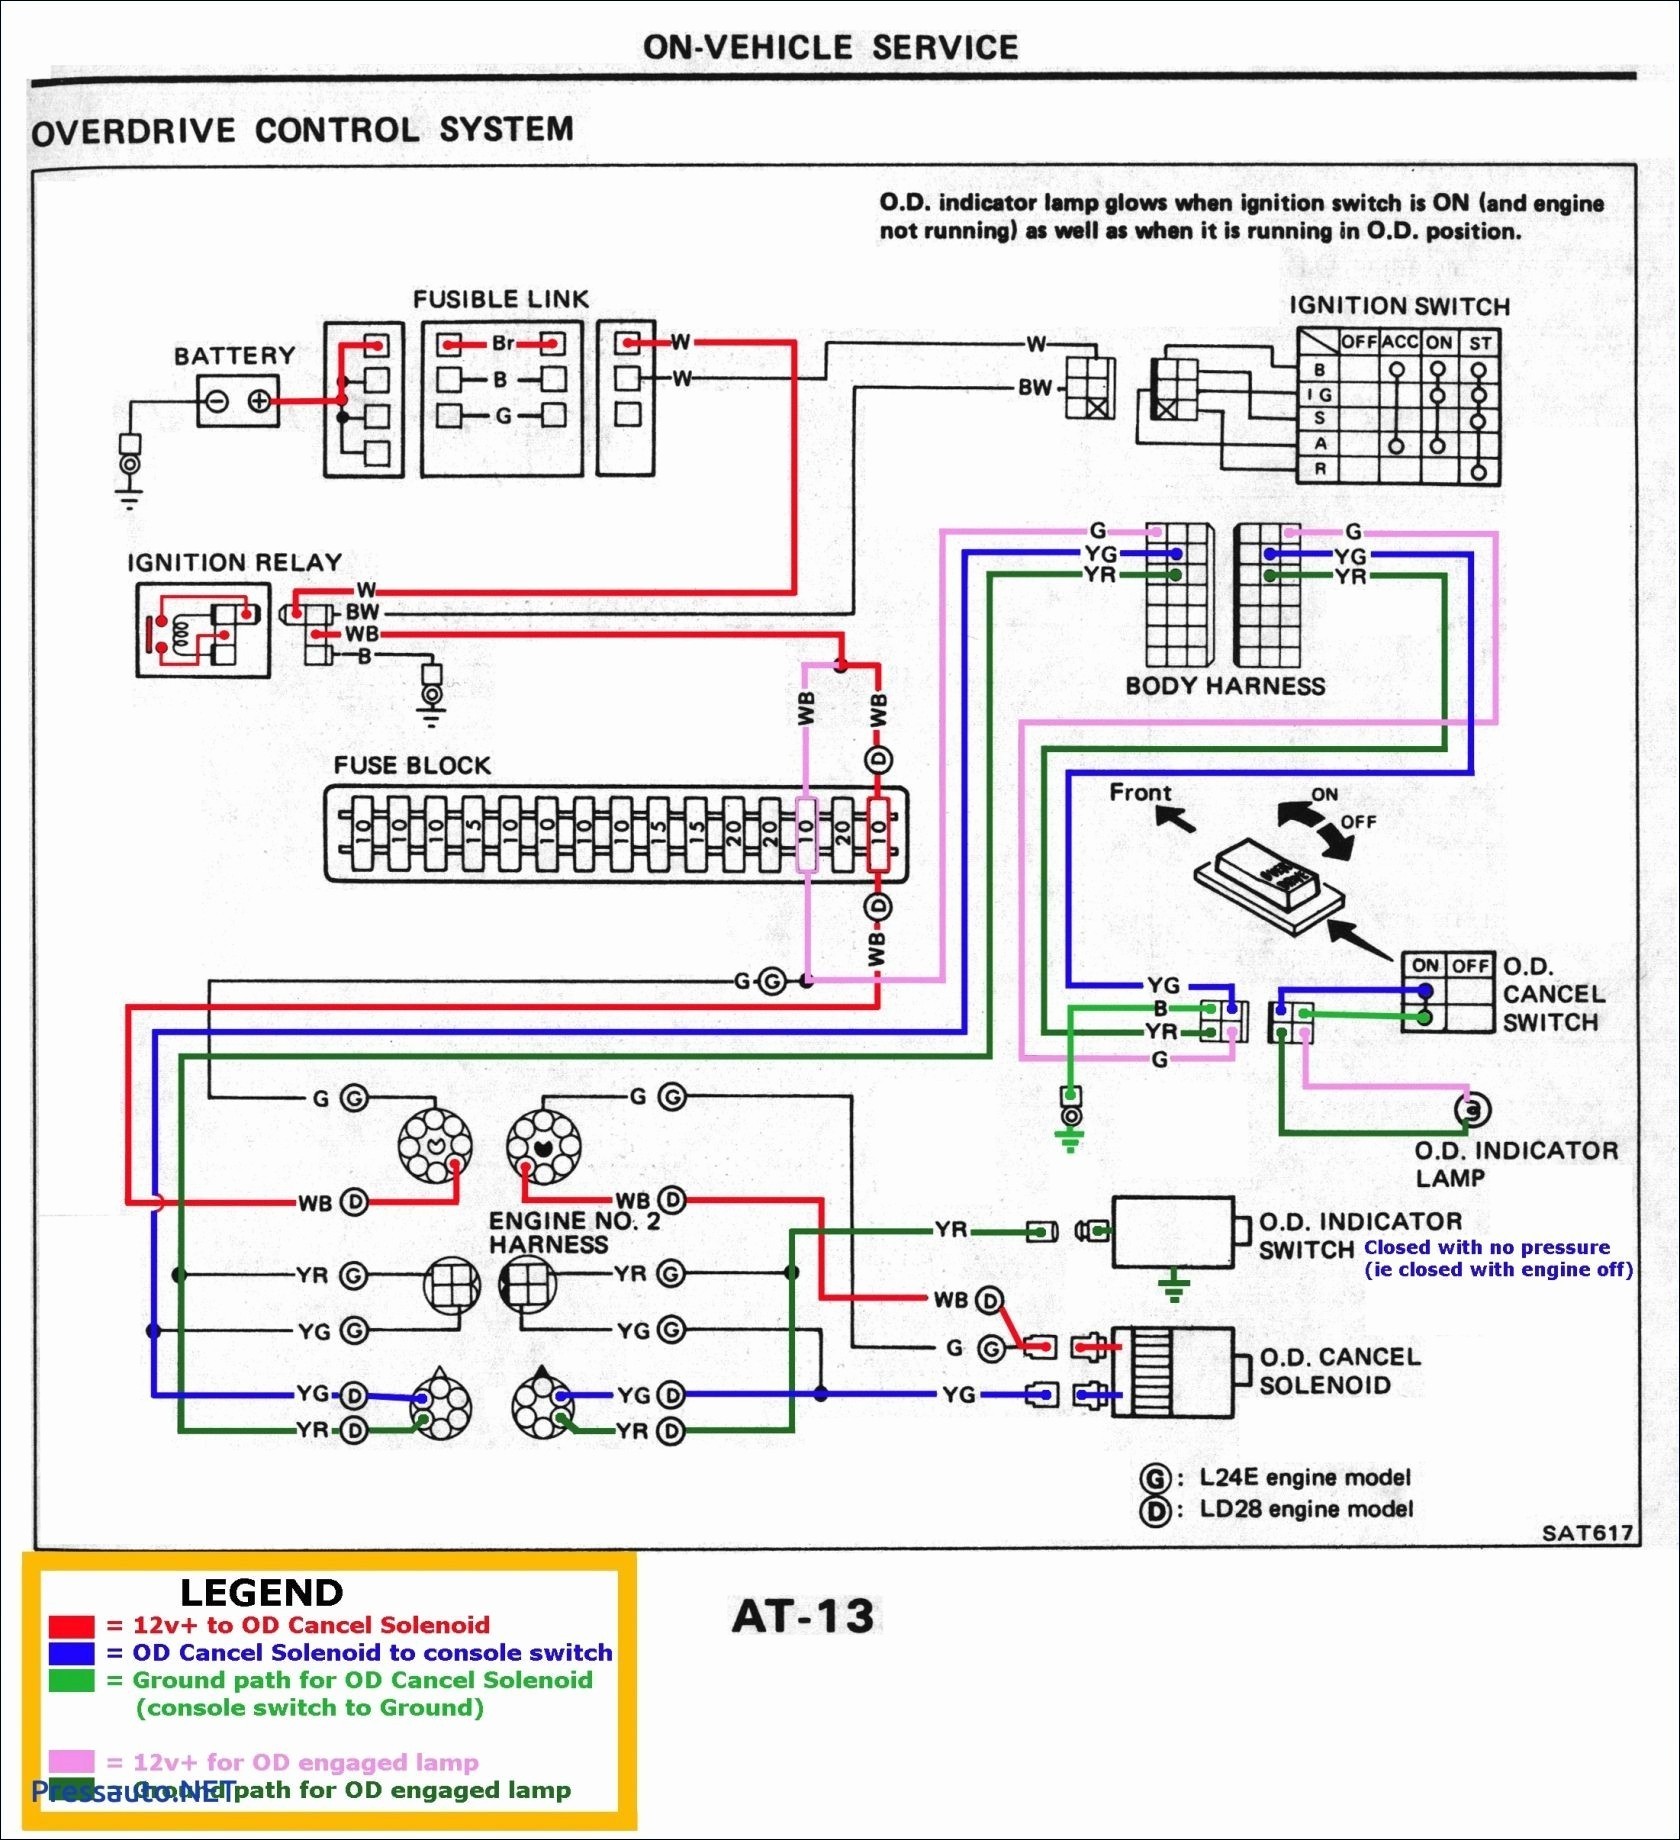 cat5 to hdmi wiring diagram gallerycat5 to hdmi wiring diagram